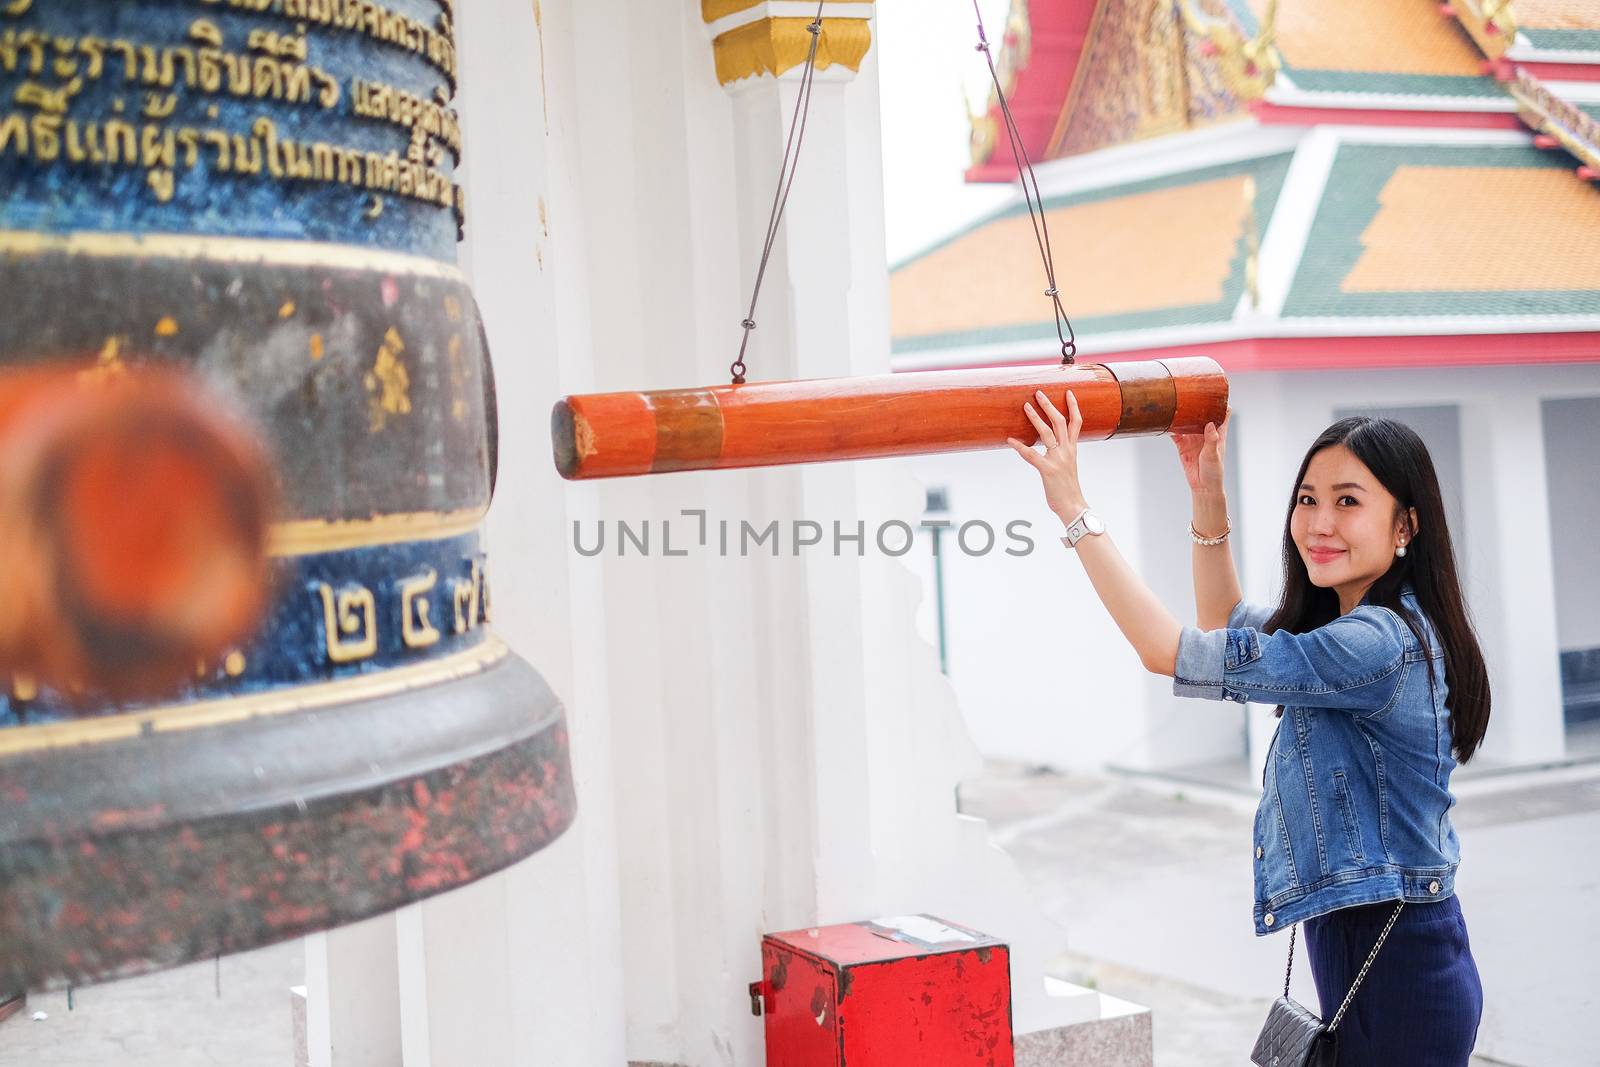 Woman ringing a bell in a Buddhist temple in Thailand